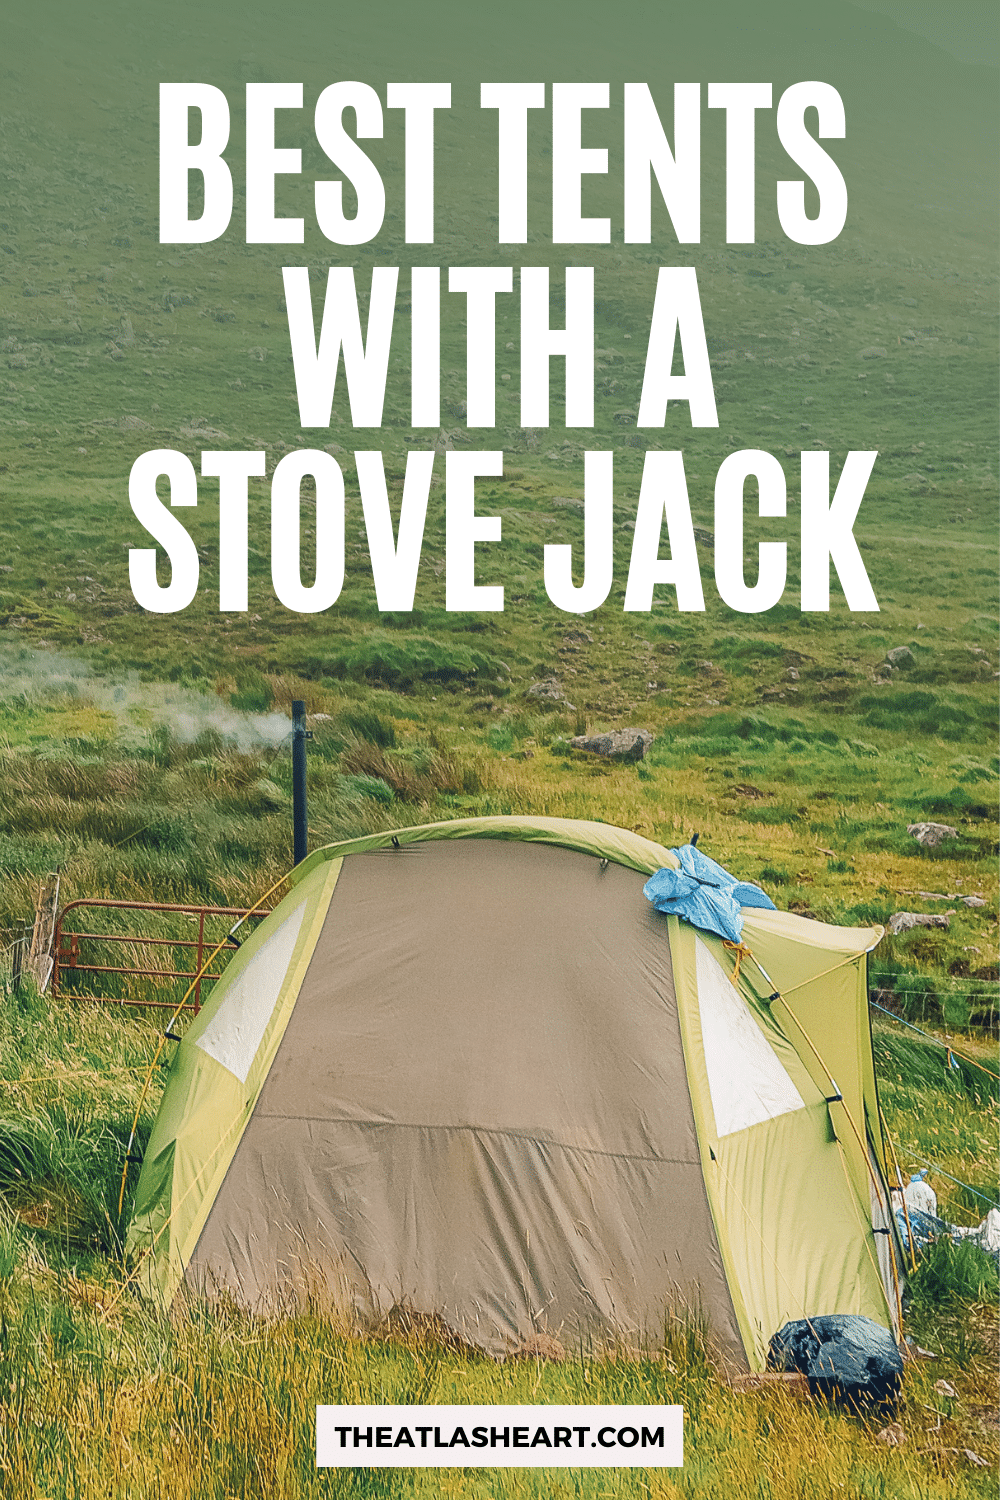 16 Best Tents with a Stove Jack for Your Next Winter Camping Trip